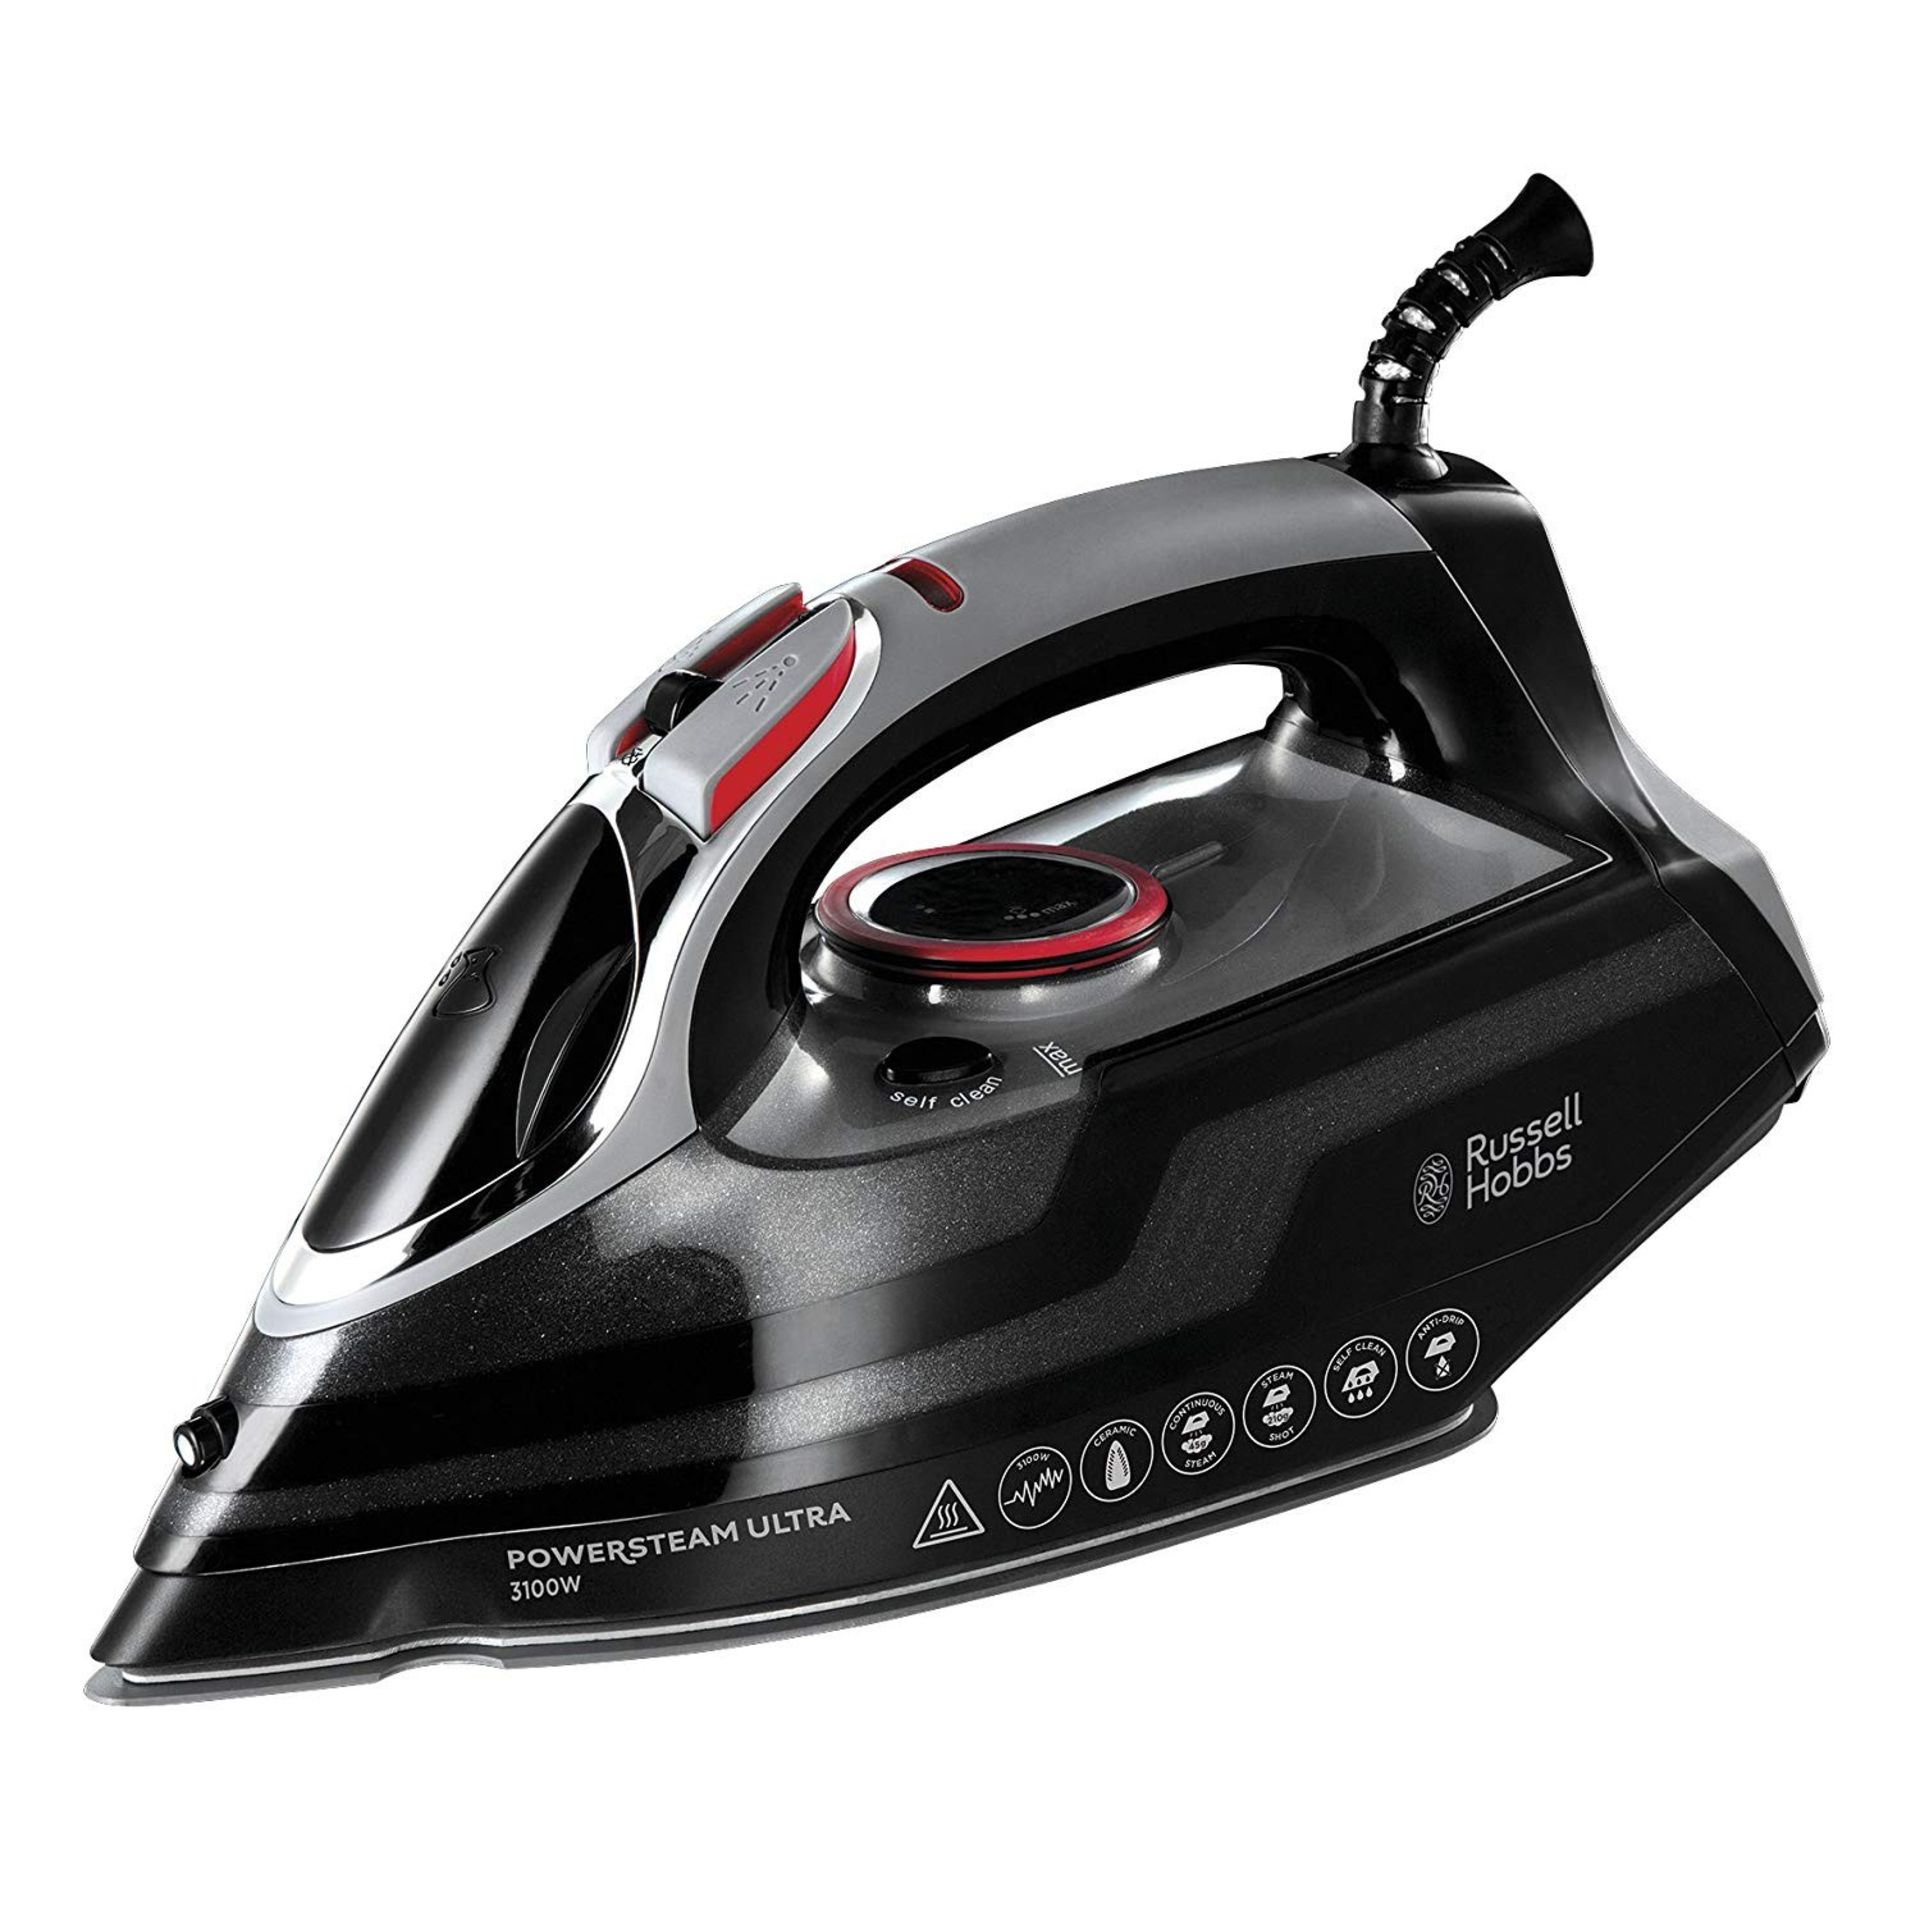 Russell Hobbs Powersteam Ultra 3100 W Vertical Steam Iron 20630 - Black and Grey Â£49.99Condition